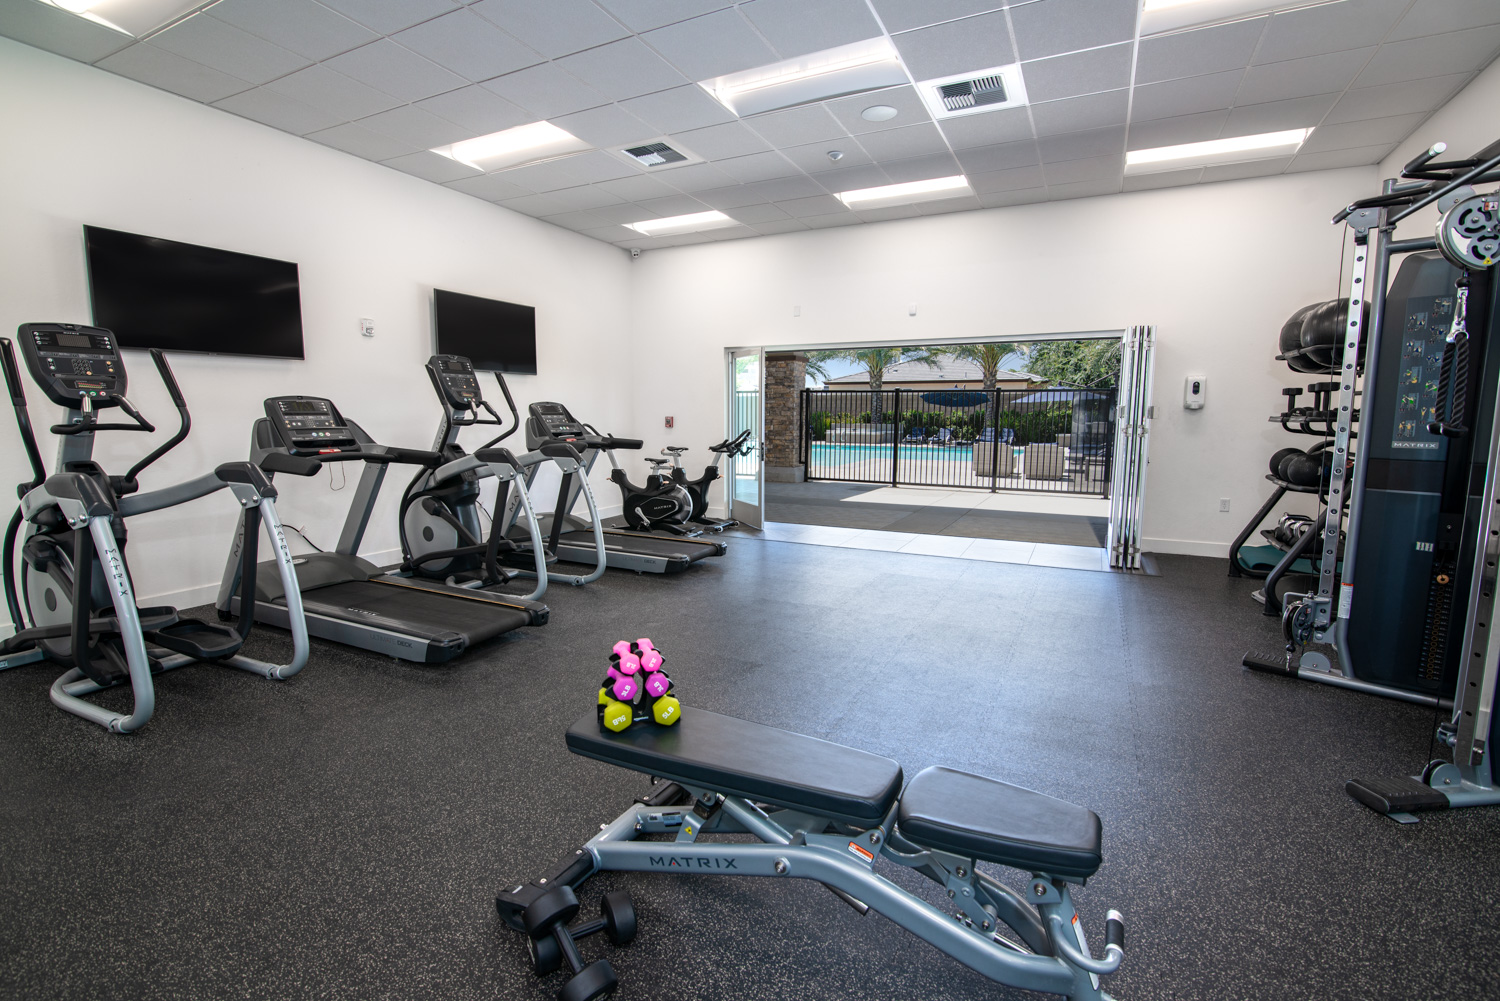 After image of the same fitness area, now vividly showcasing the details of the equipment with correct color balance and natural shadows. The improvements in the photo allow a clear view through the expansive window wall, revealing the scenic outdoors that complement the high-end interior.